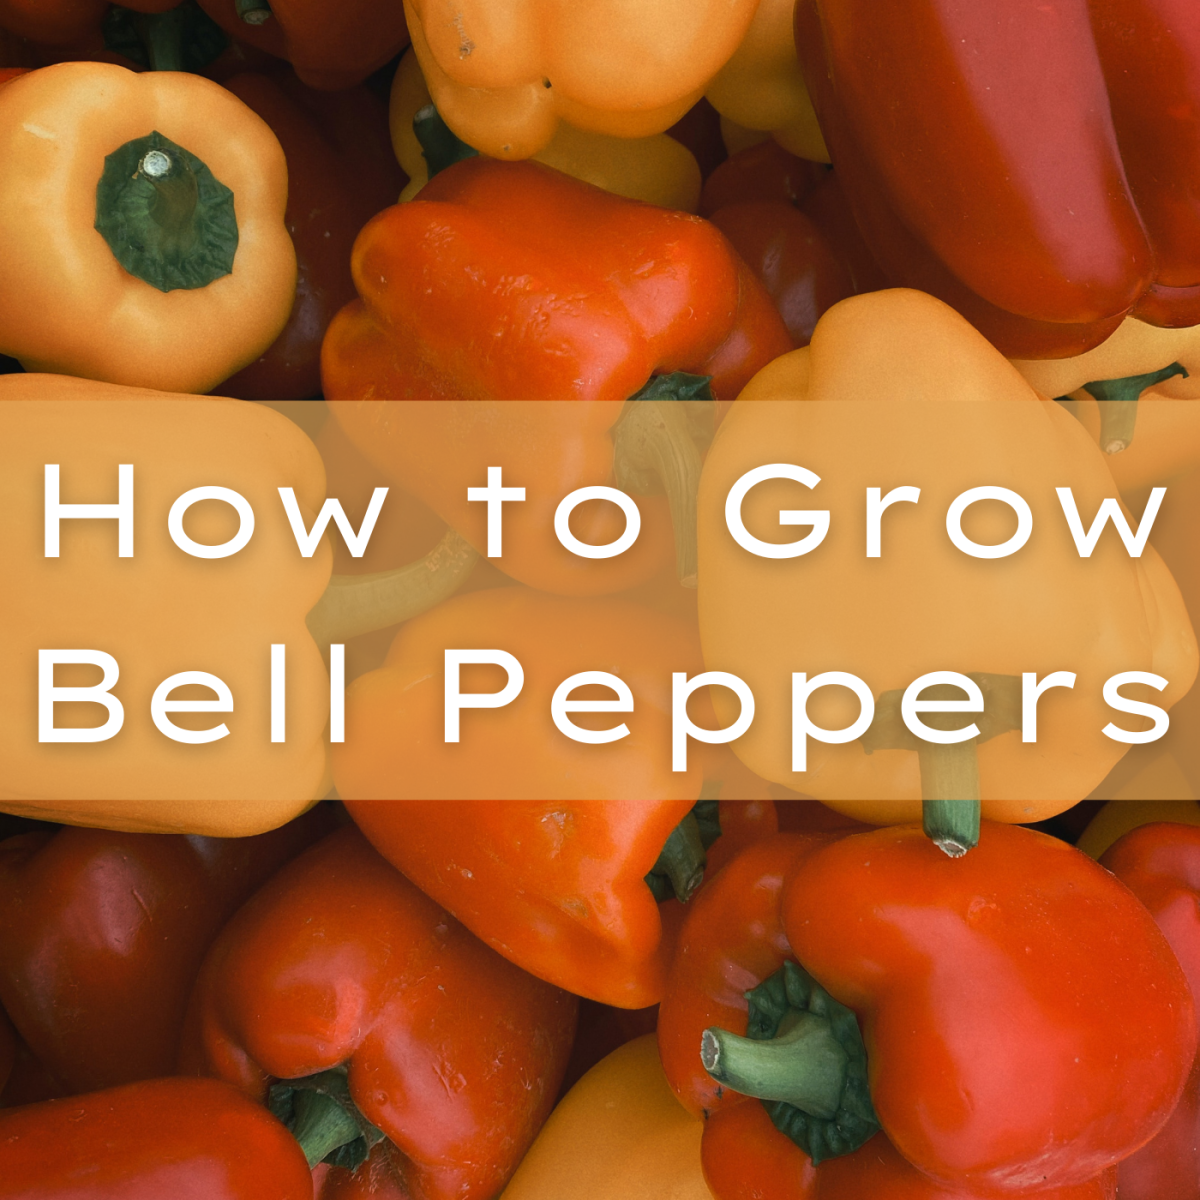 Learn how to grow different colored bell peppers.